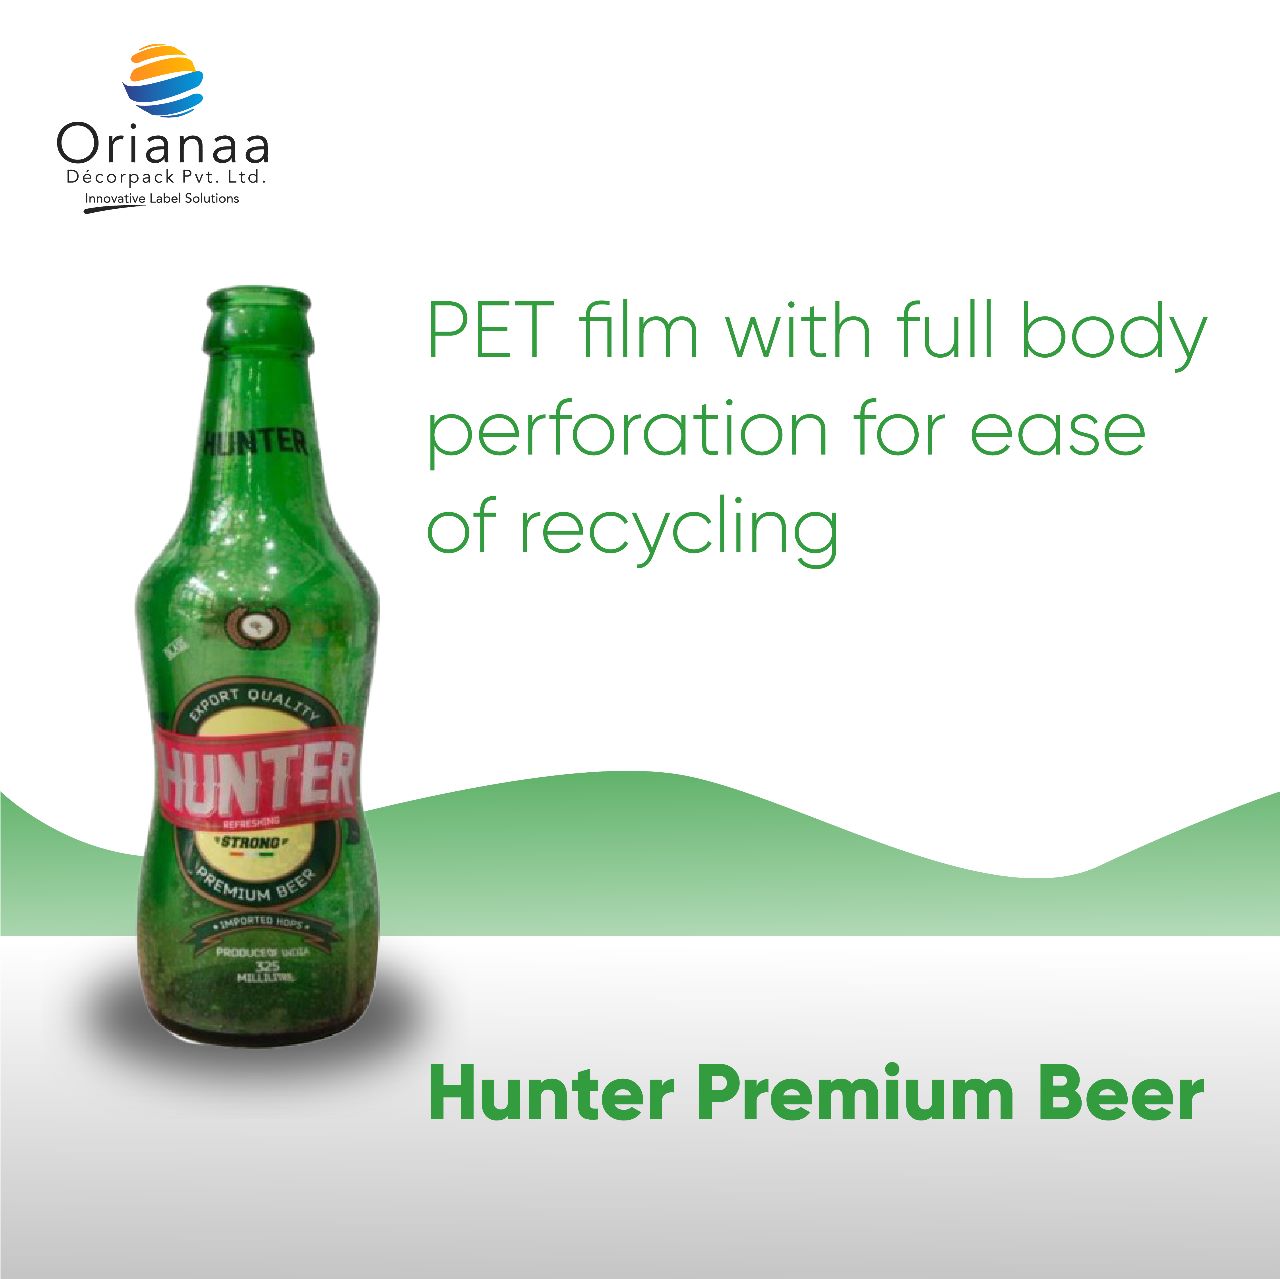 Recyclable PET Film with Full Body Perforation | Orianaa Decorpack